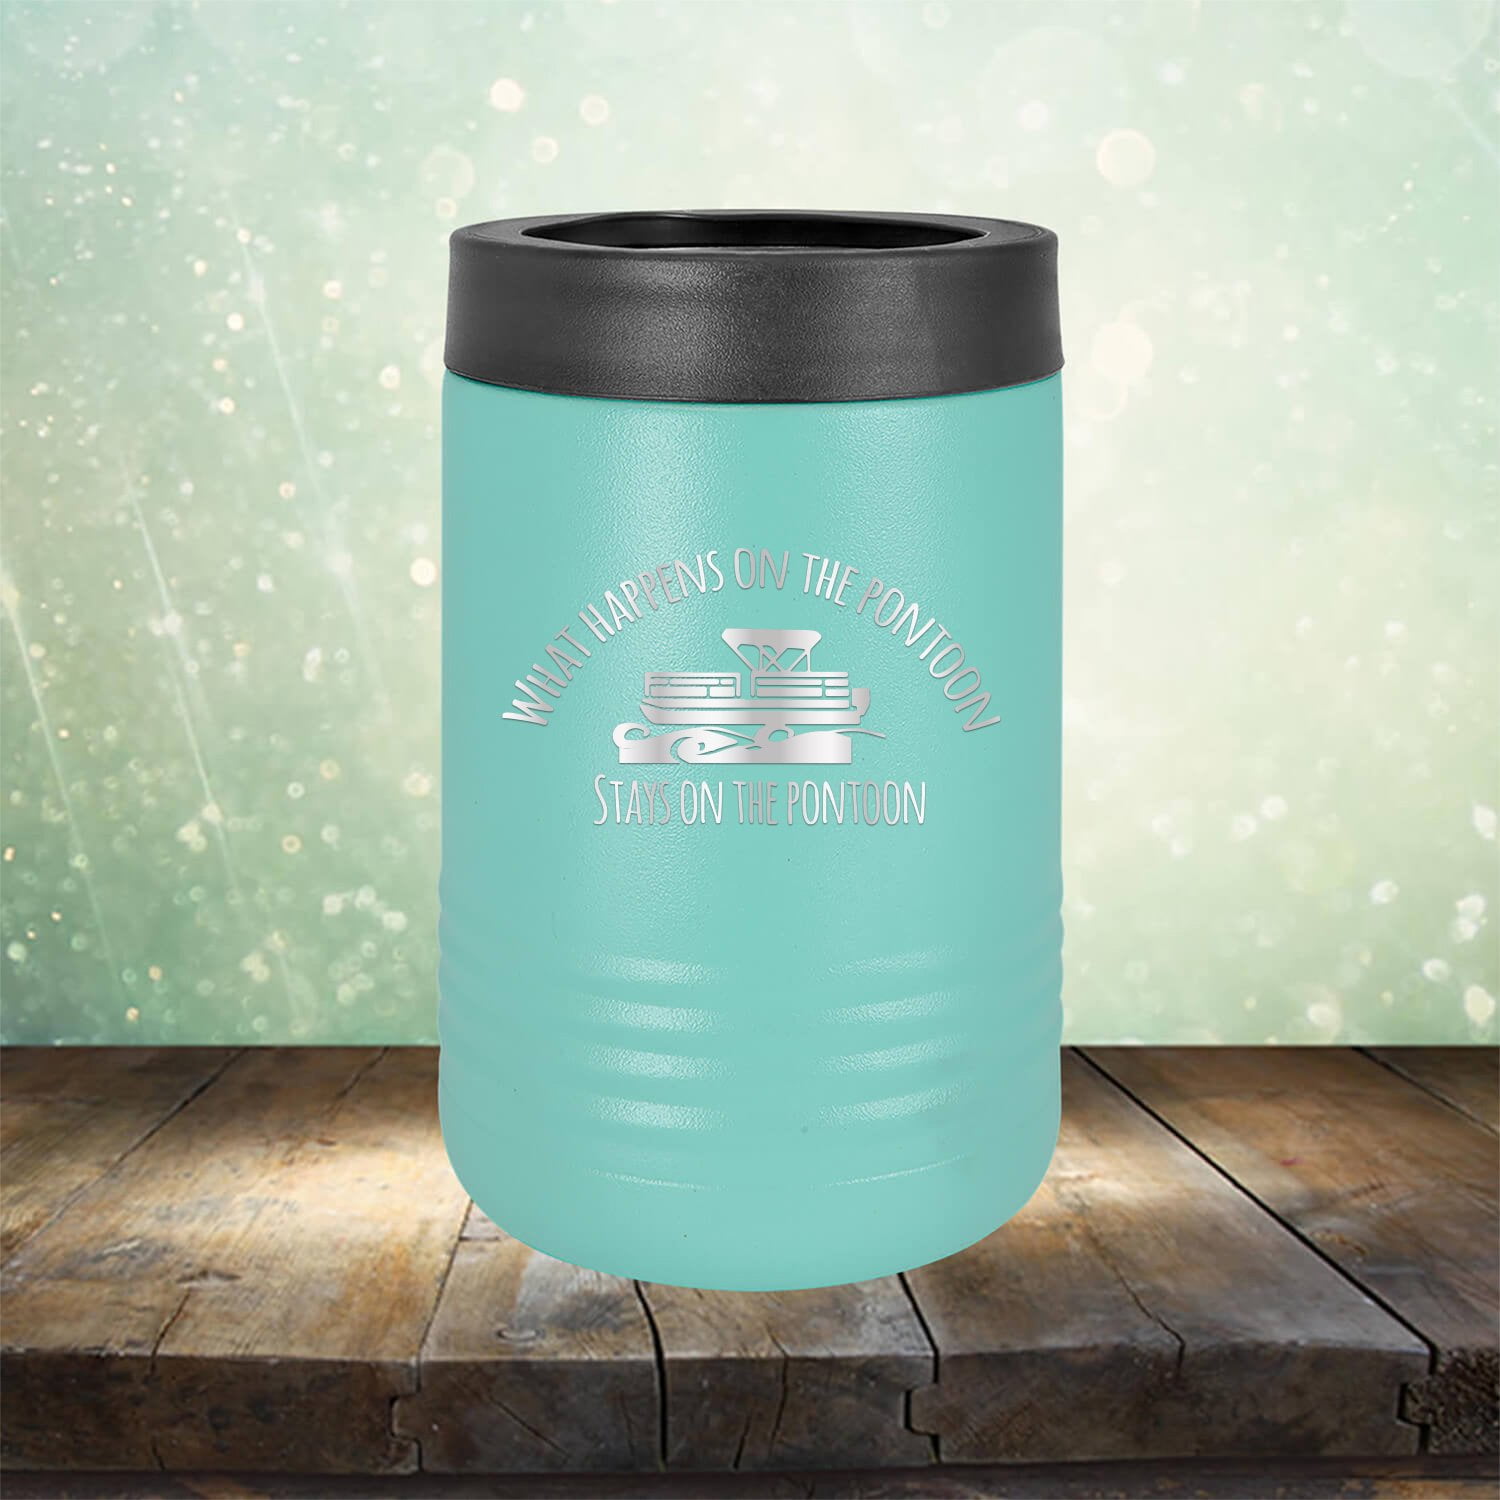 Best Dad By Par Personalized Engraved YETI